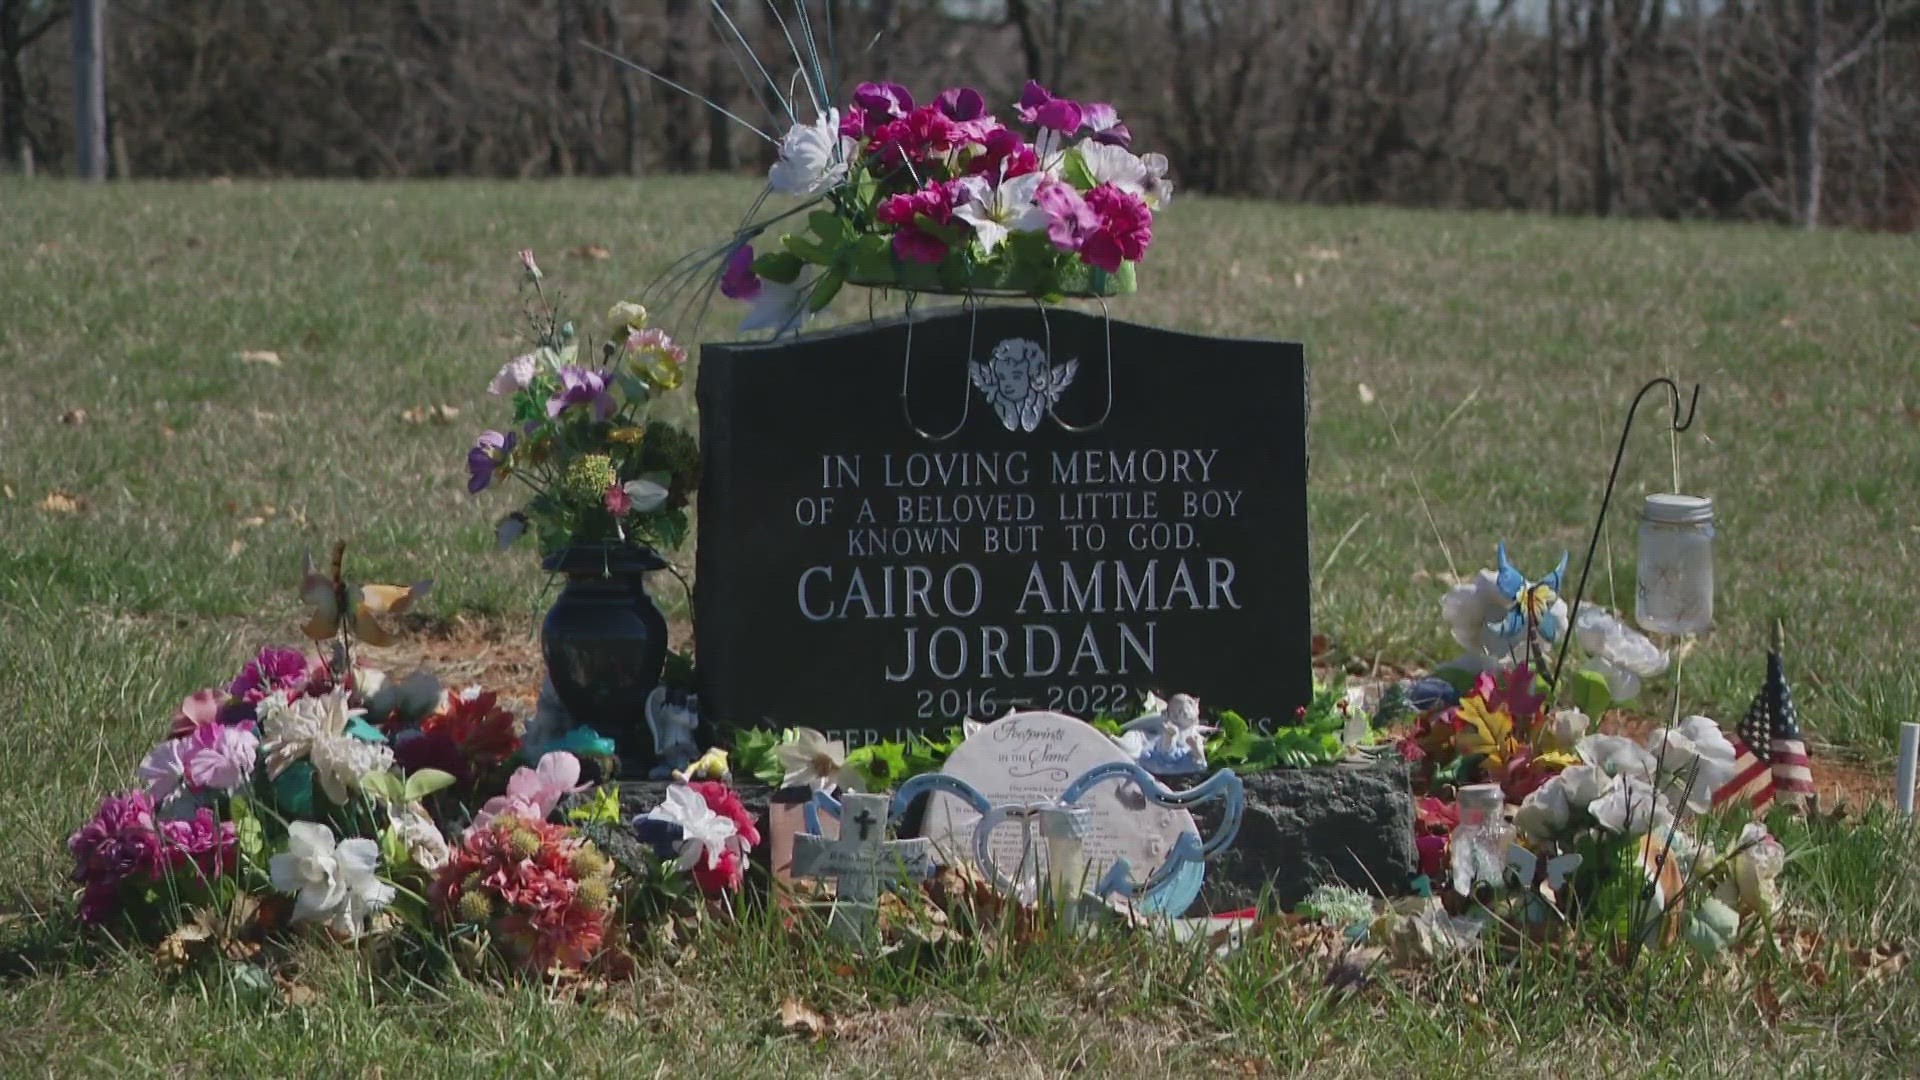 After Cairo Jordan's mom was caught by police Friday, the man who found the 5-year-old in the suitcase in Washington County said he is relieved.